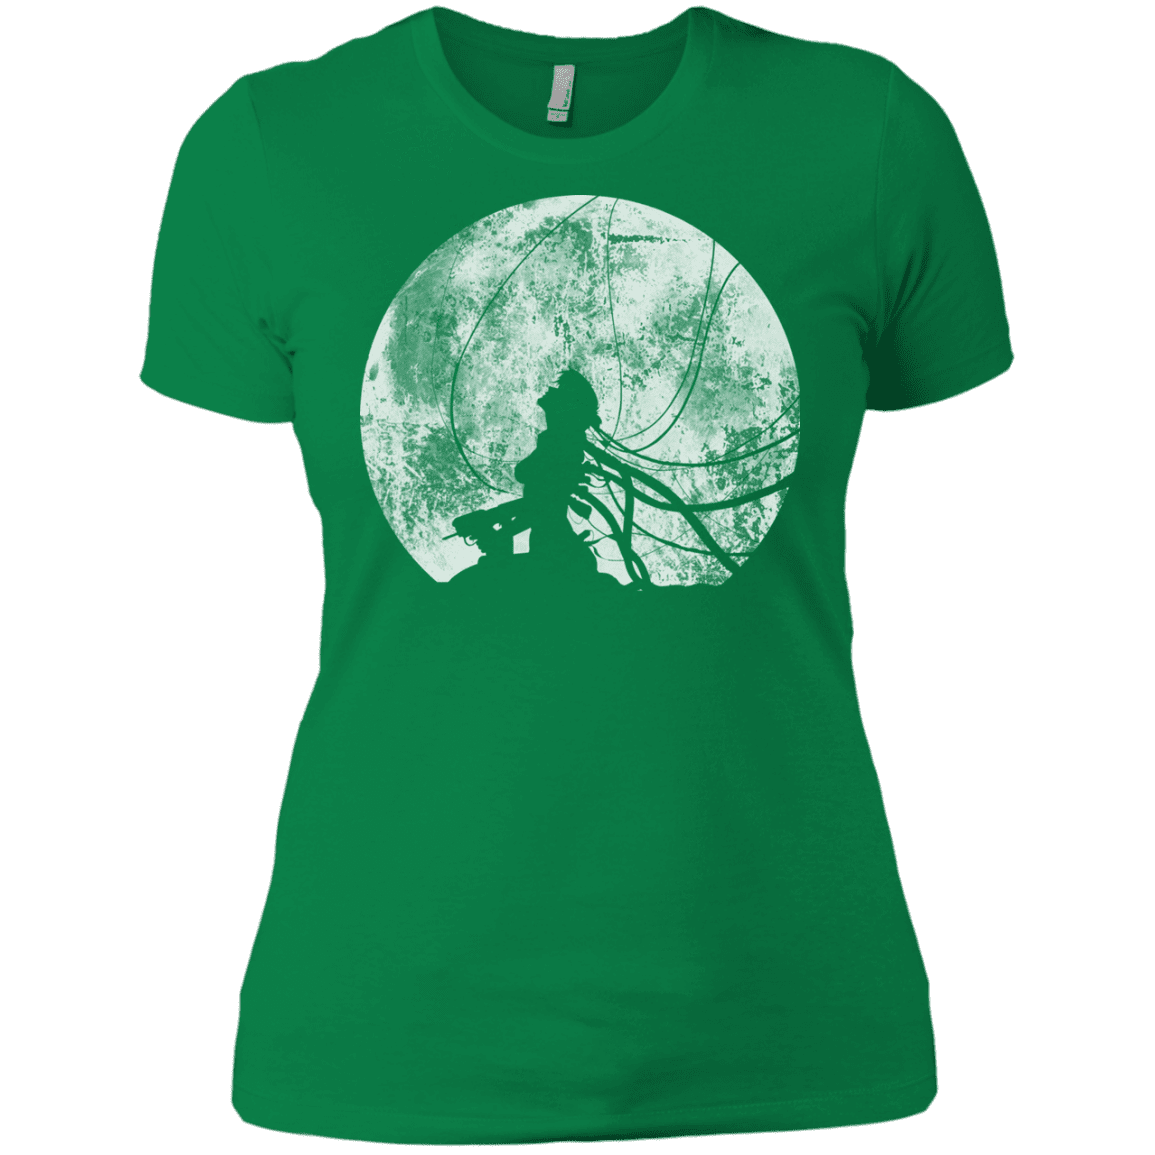 T-Shirts Kelly Green / X-Small Shell of a Ghost Women's Premium T-Shirt